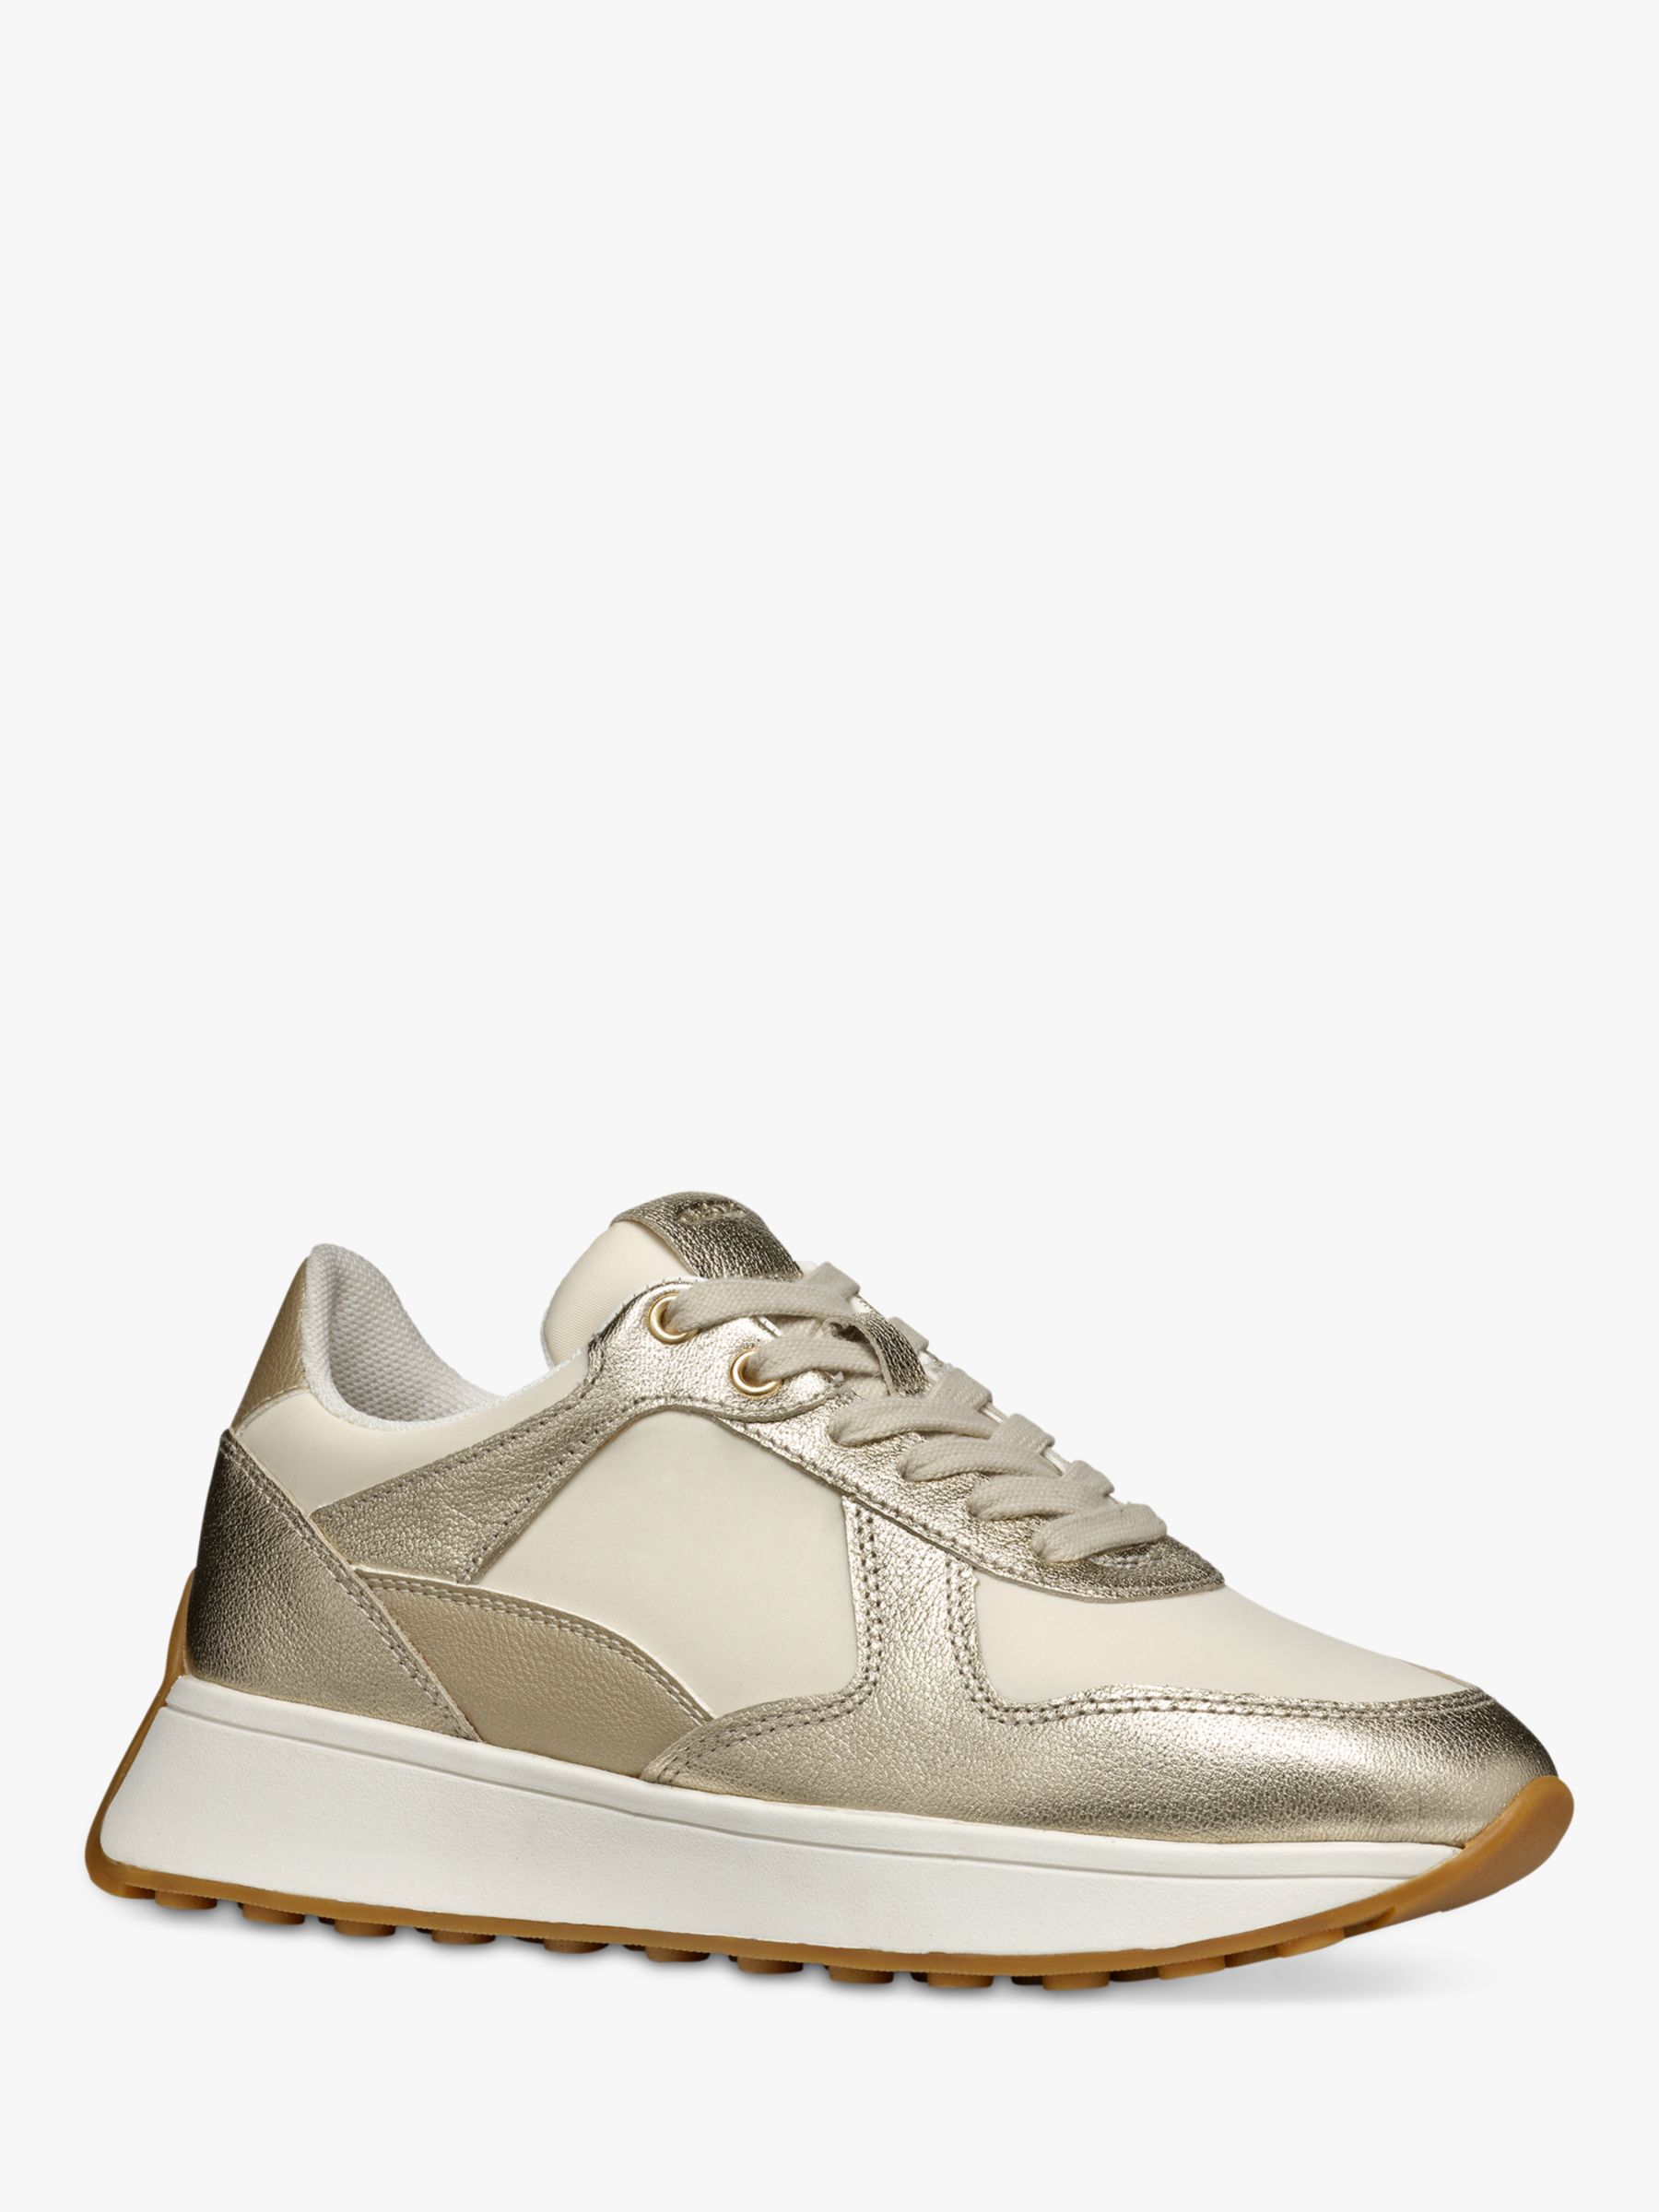 Buy Geox Amabel Retro Lace-Up Trainers, Gold/Light Taupe Online at johnlewis.com